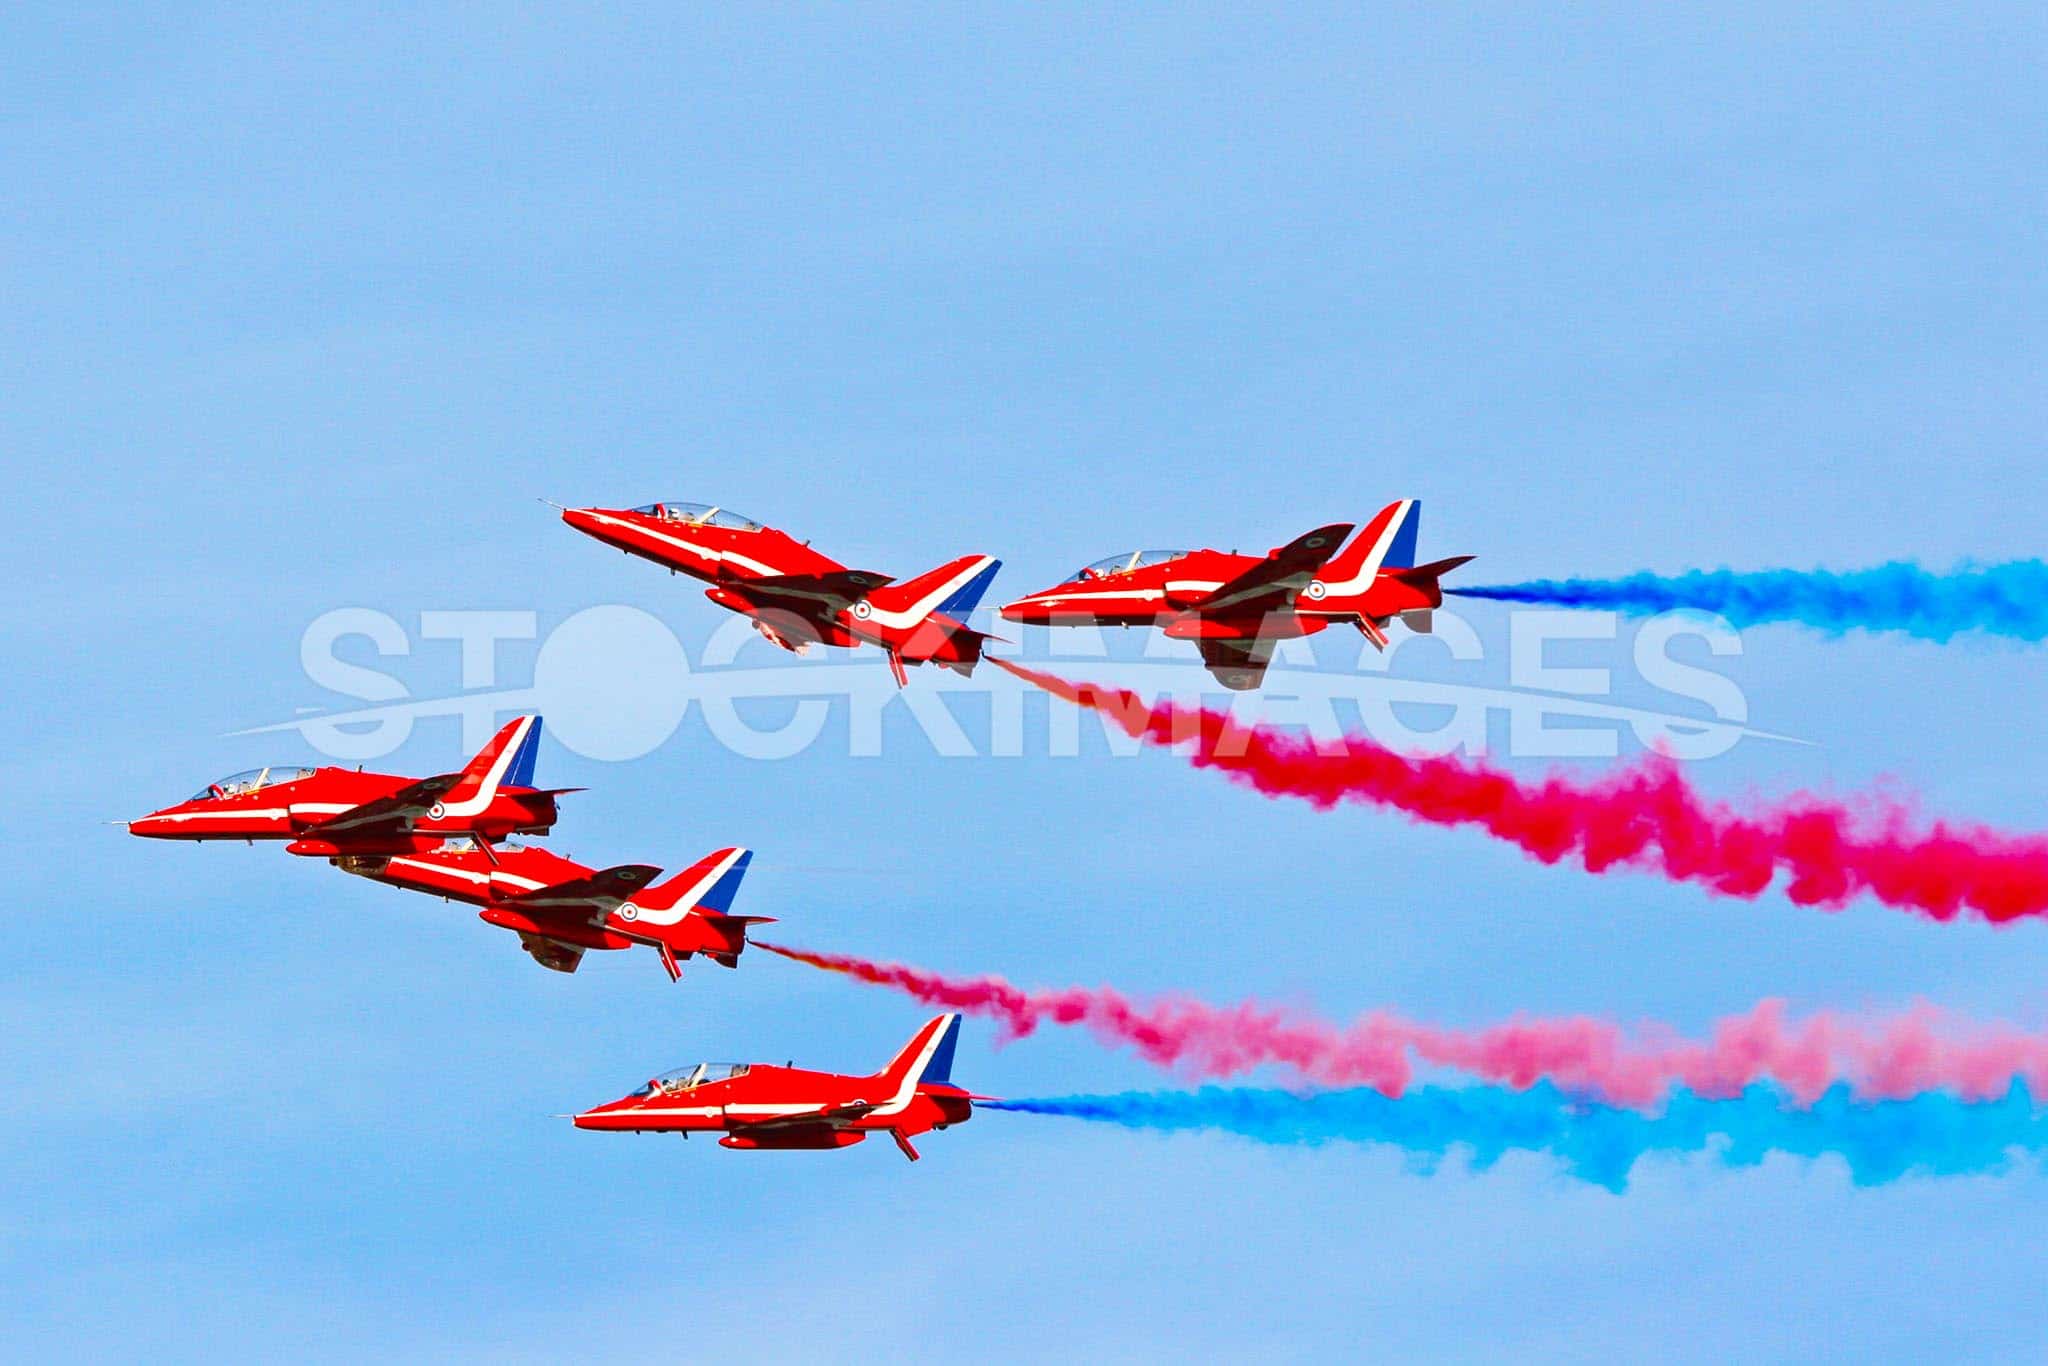 The RAF Red Arrows displaying at Dartmouth, their vibrant colours piercing the sky.